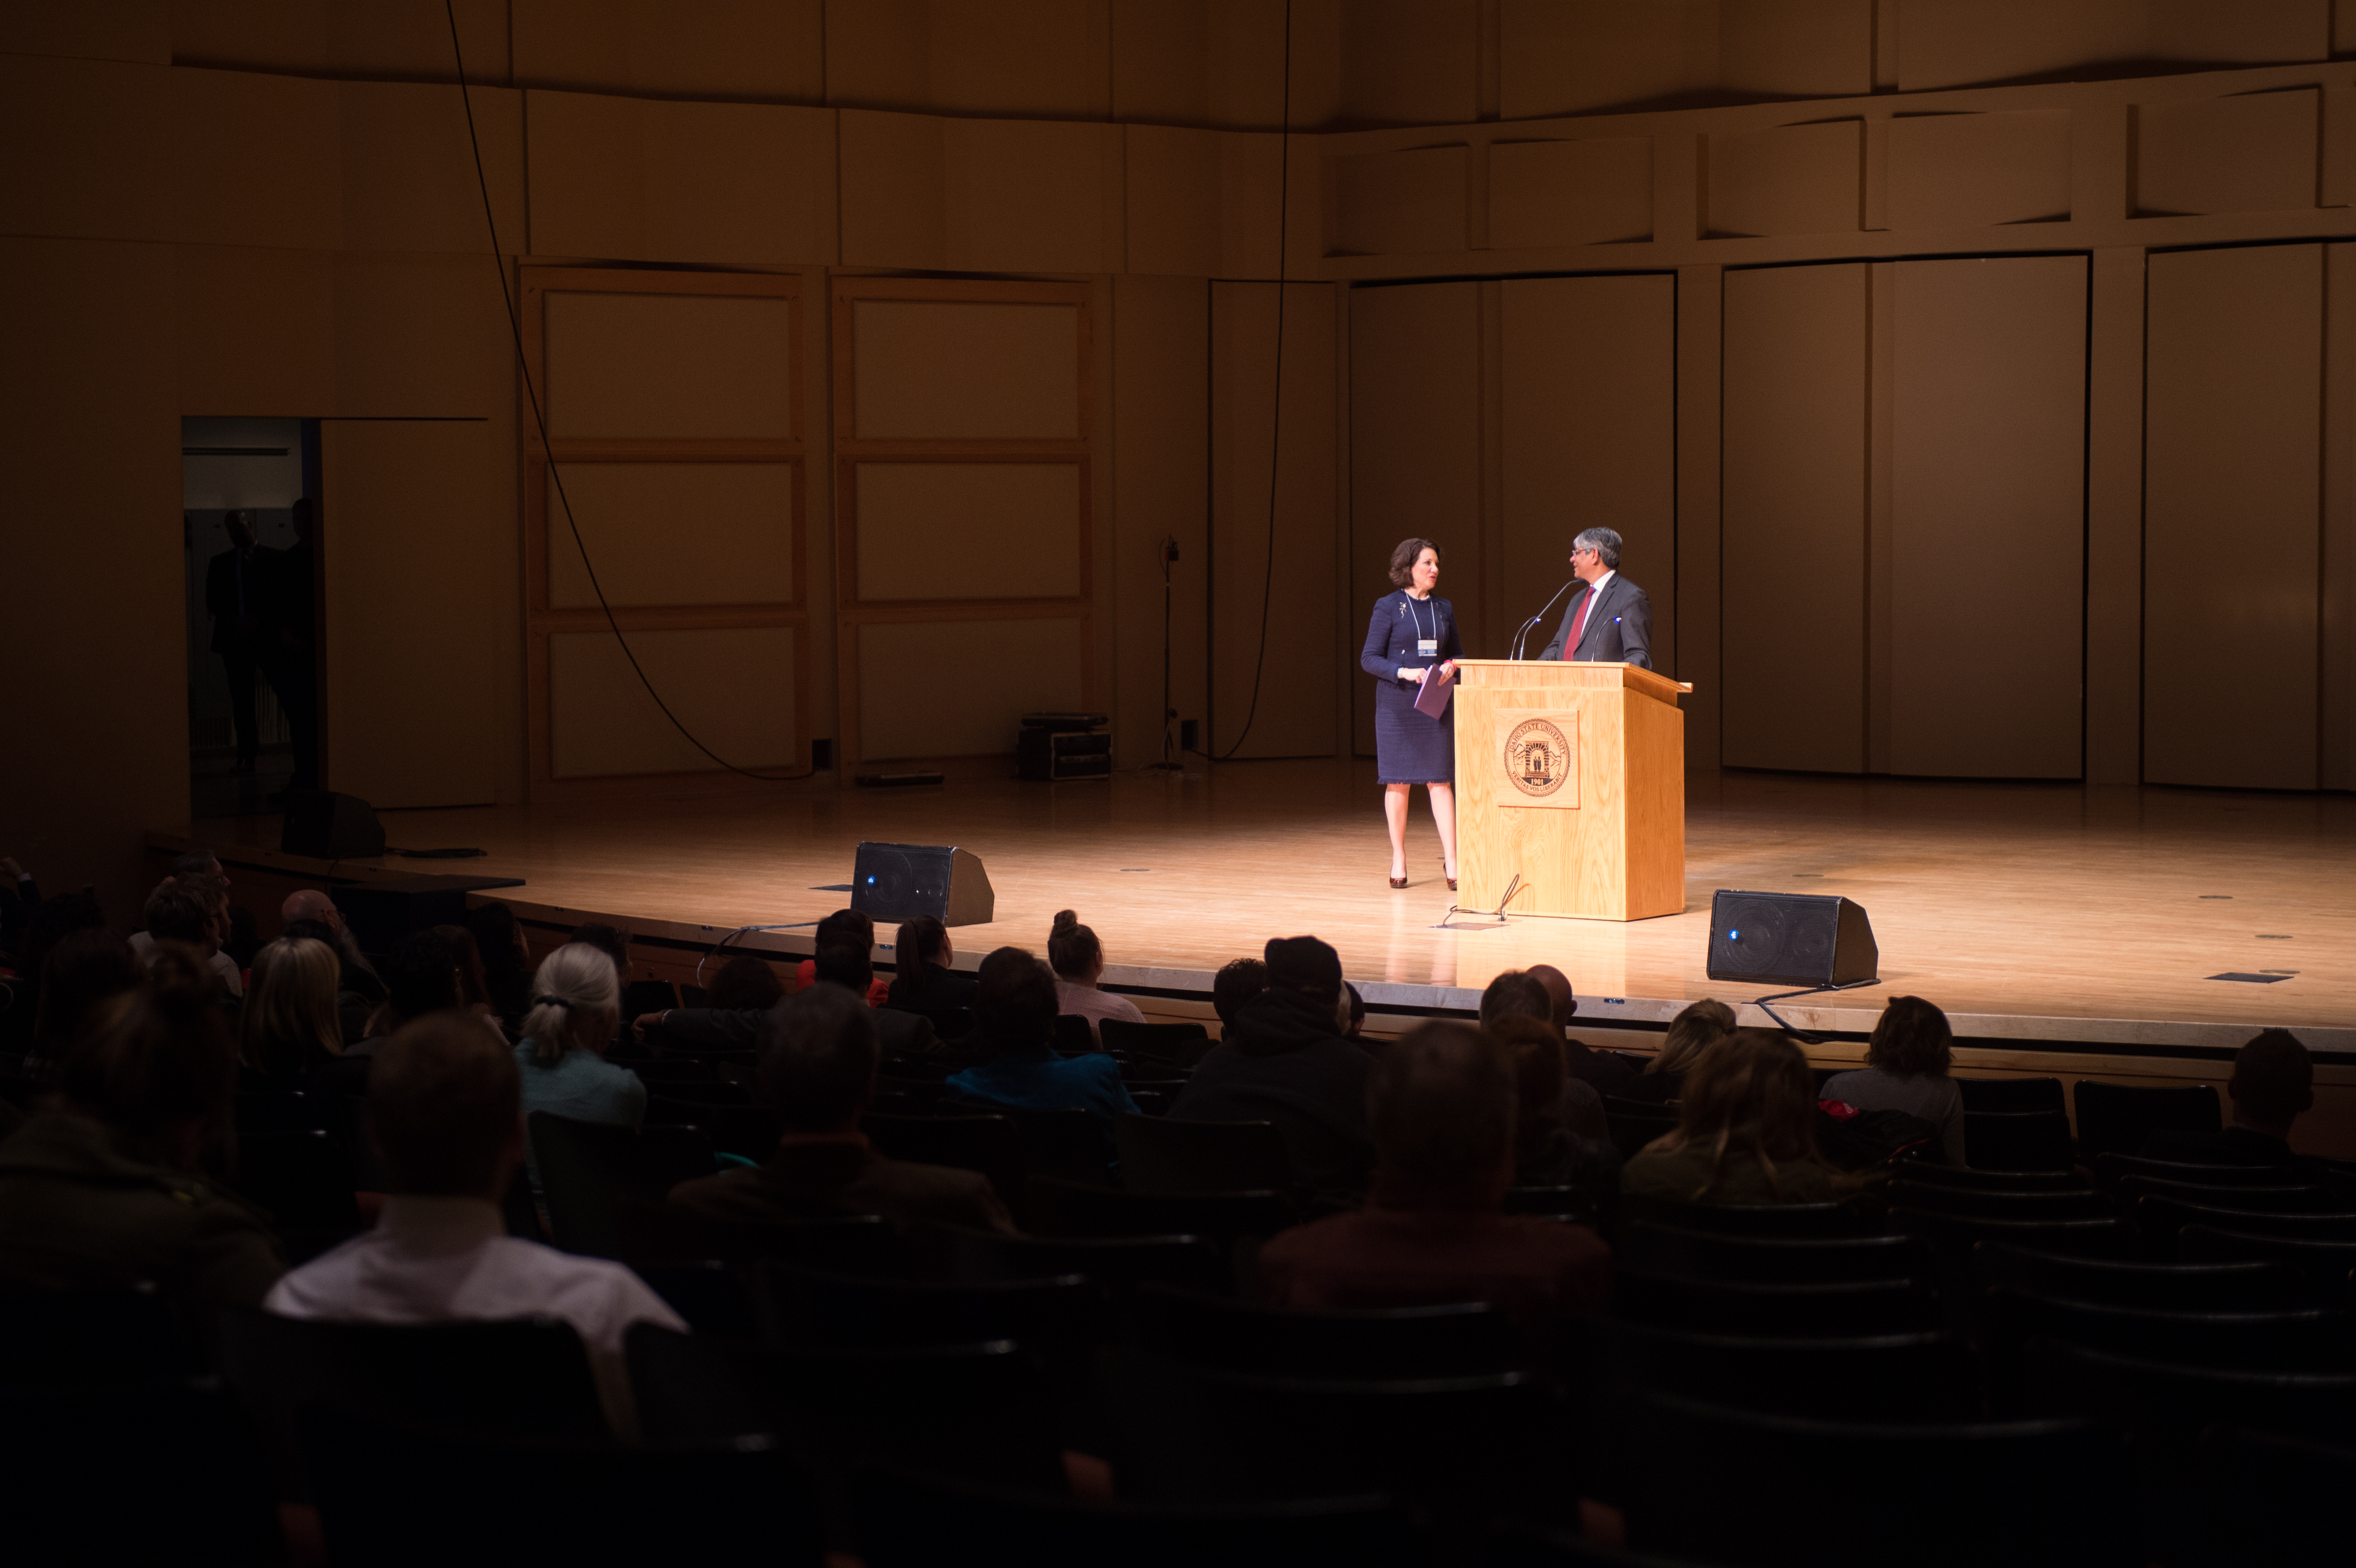 Two speakers standing on stage in a full, dimly lit auditorium.